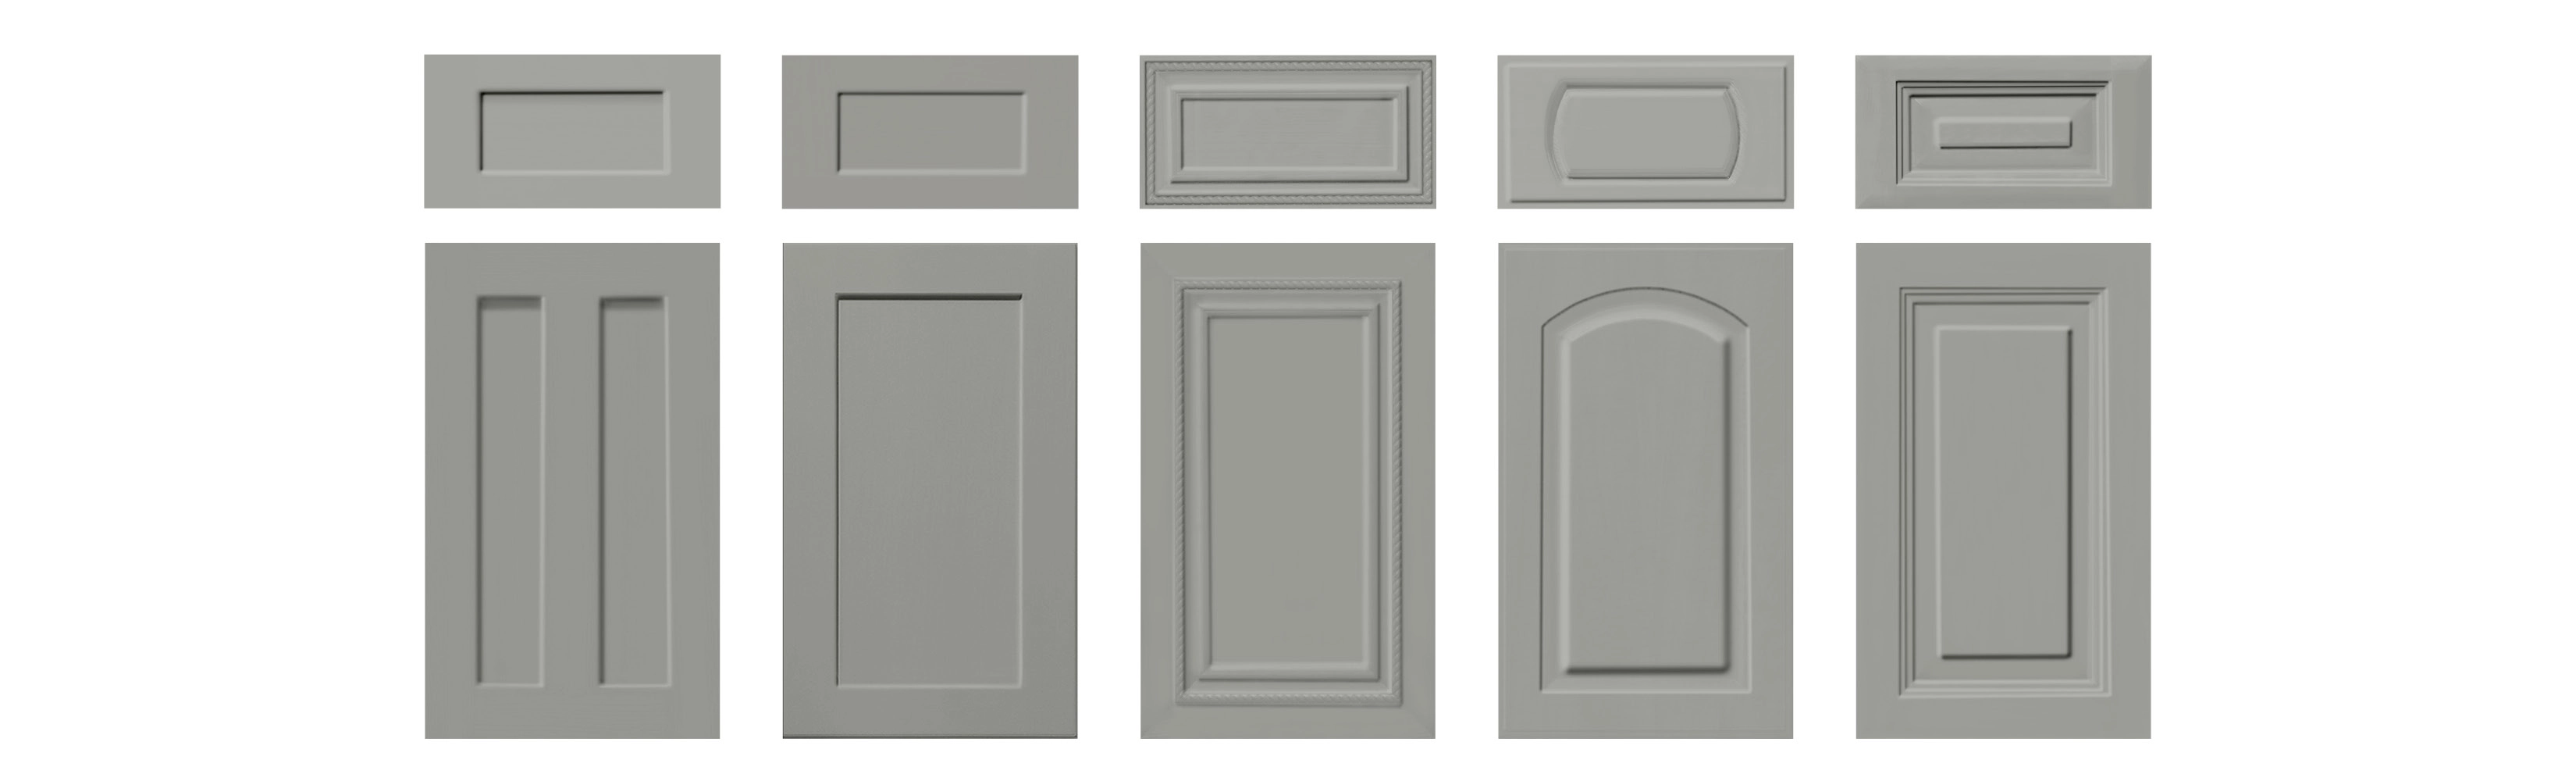 The image shows 5 different options for cabinet door styles with different framing.